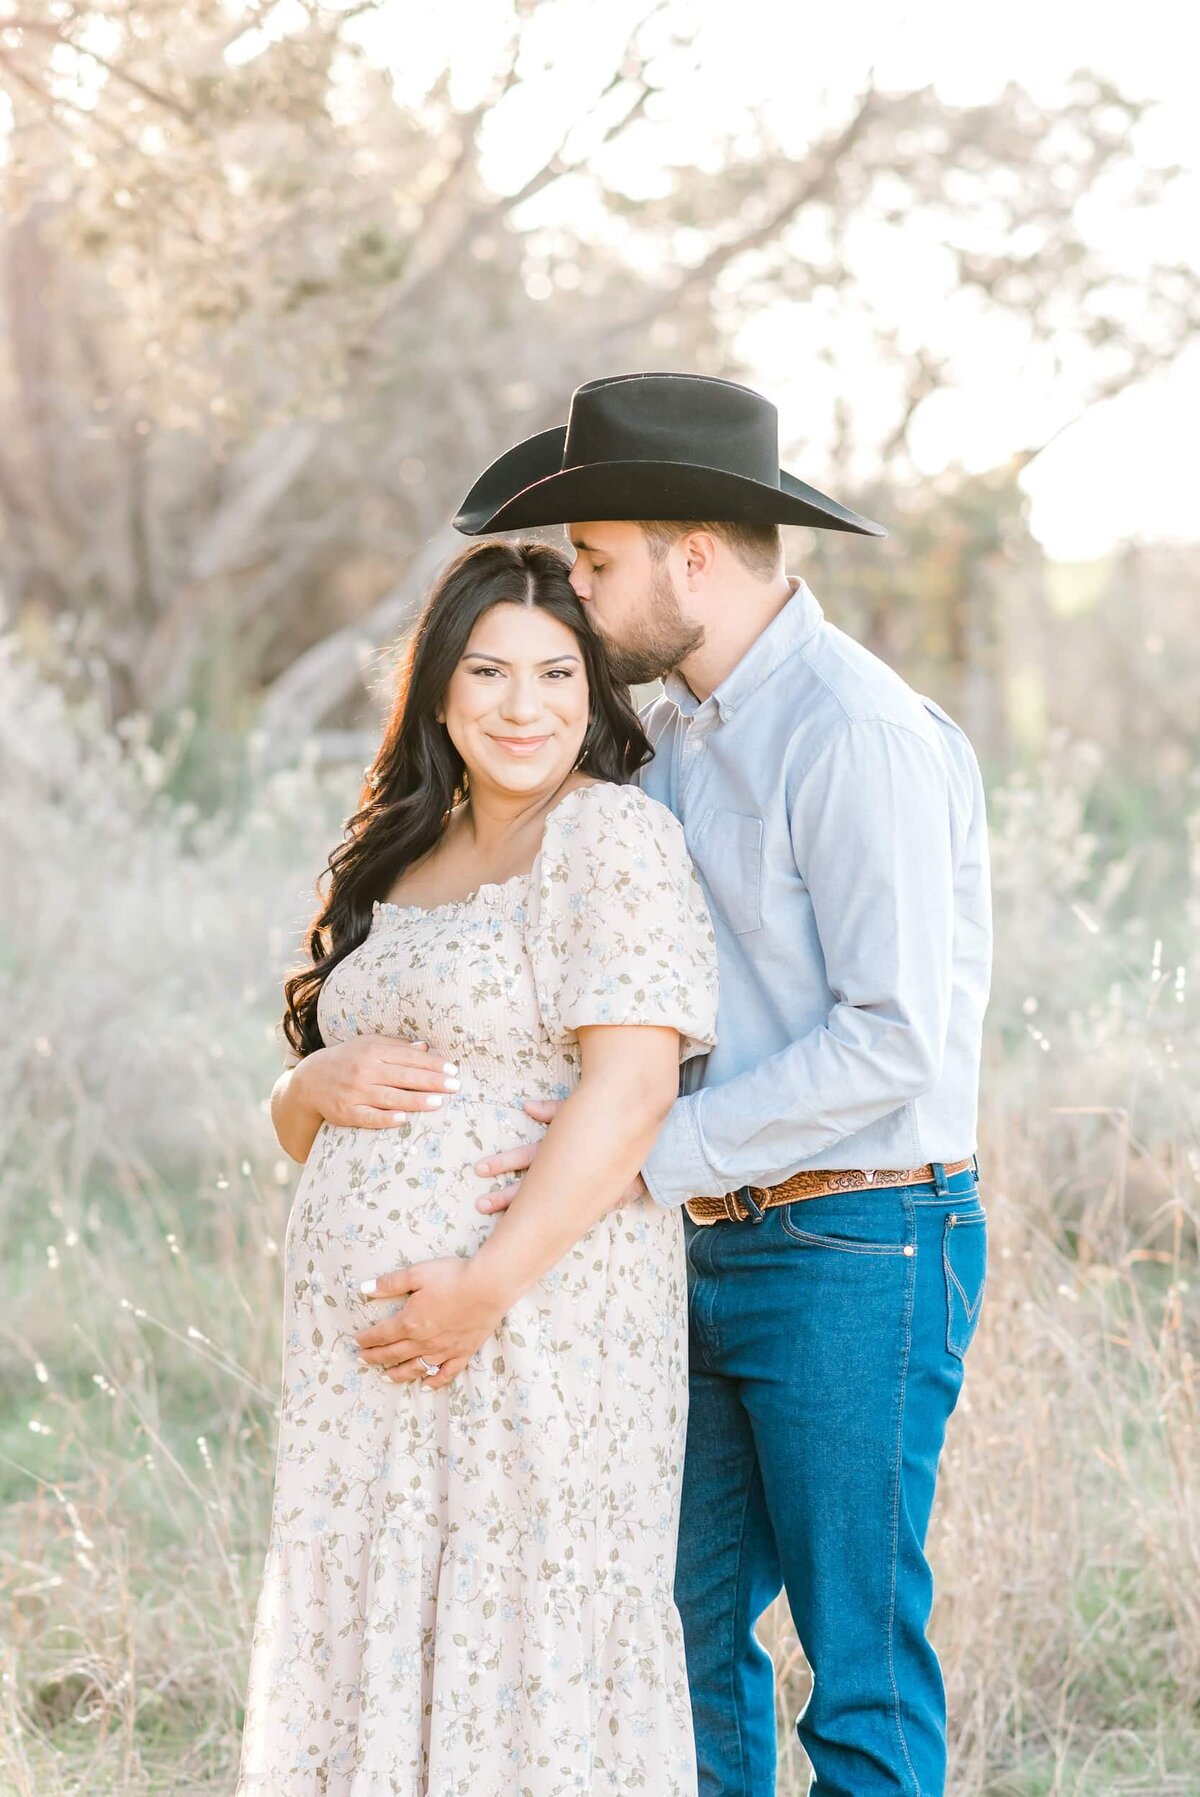 San-Antonio-Maternity-Photography-3.4.23- Melanie_s Maternity Session- Laurie Adalle Photography-30